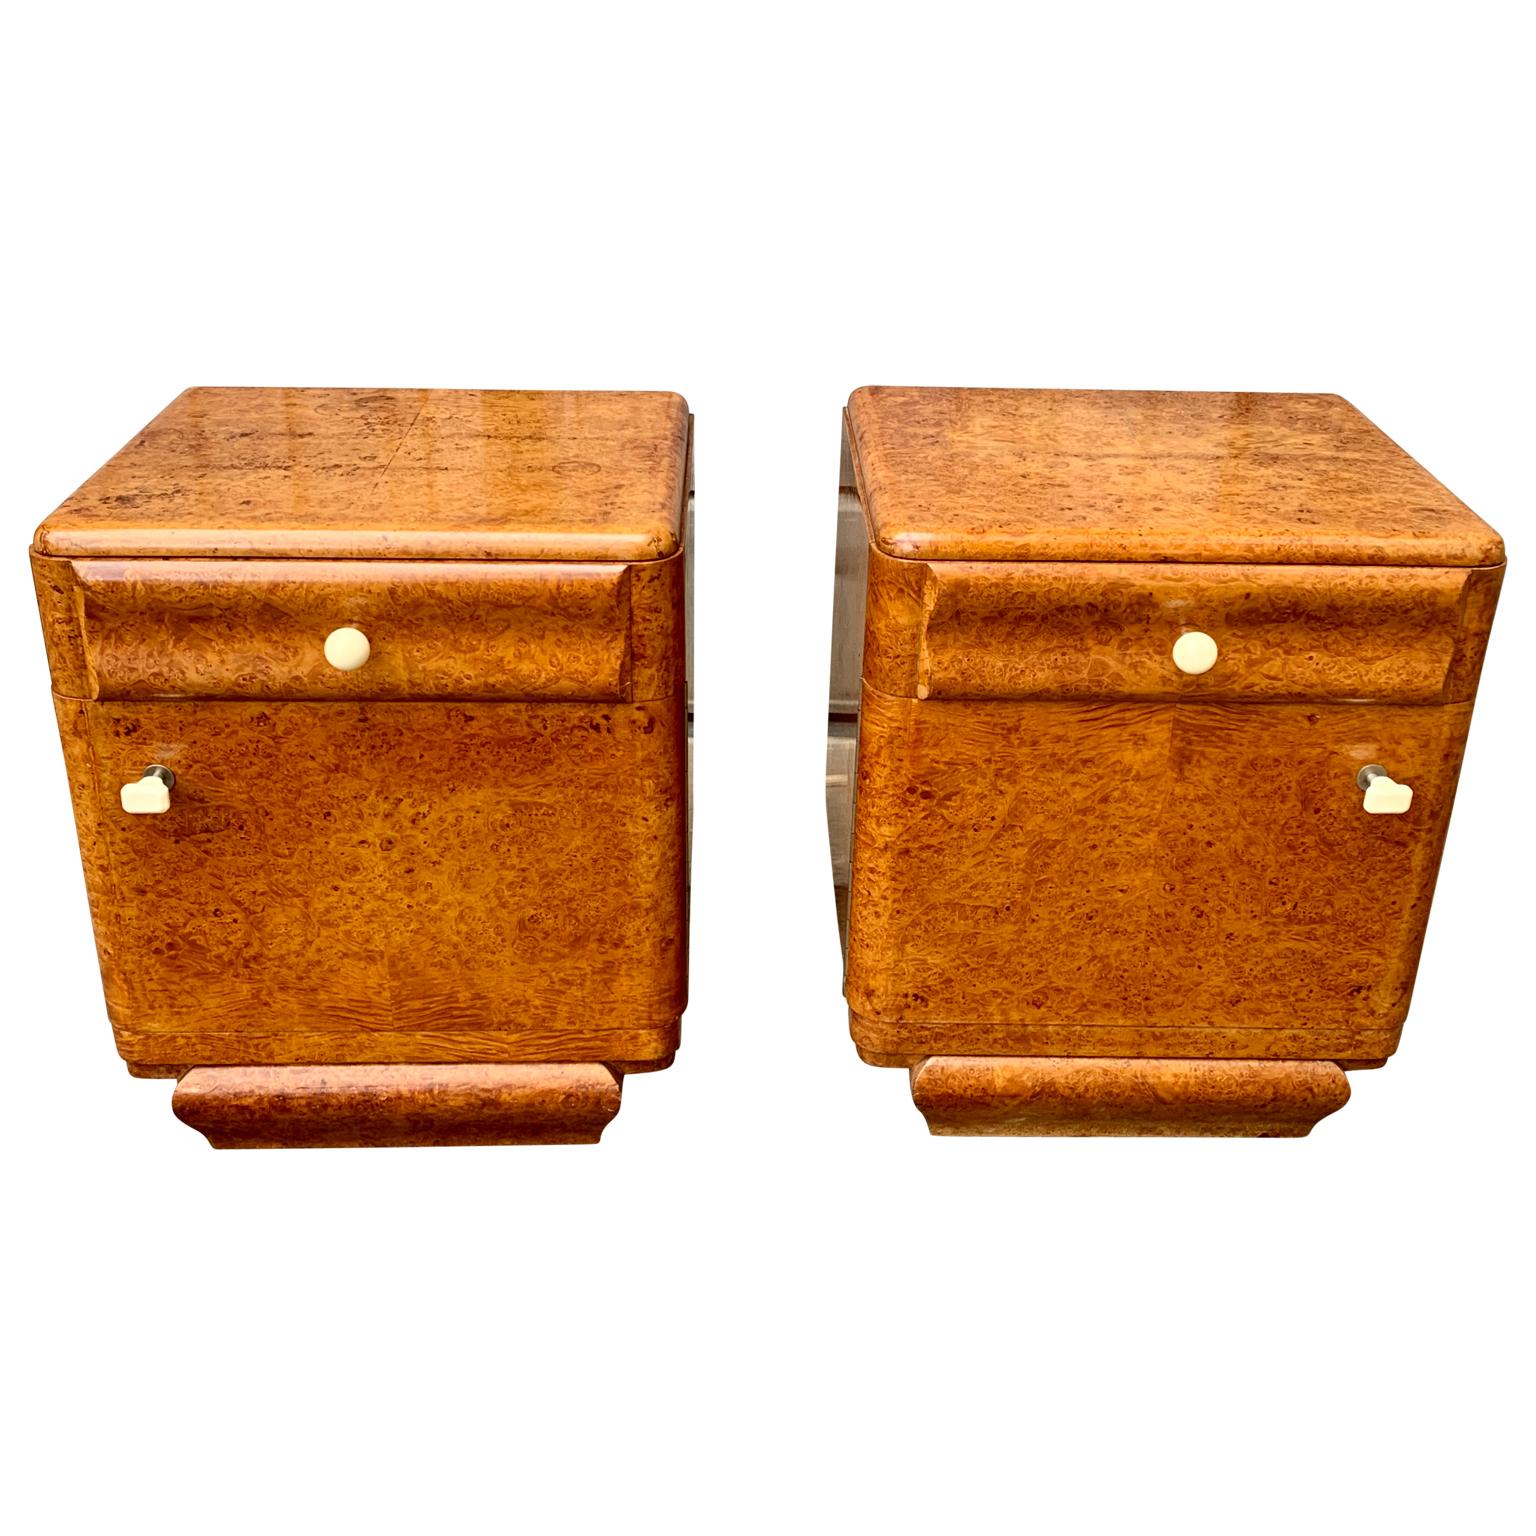 A charming pair of French nightstands or small night tables in walnut burl veneer wood and original white resin hardware.
This set is a honest pair, meaning that the set has left and right facing doors the cabinets. They were recently bought in